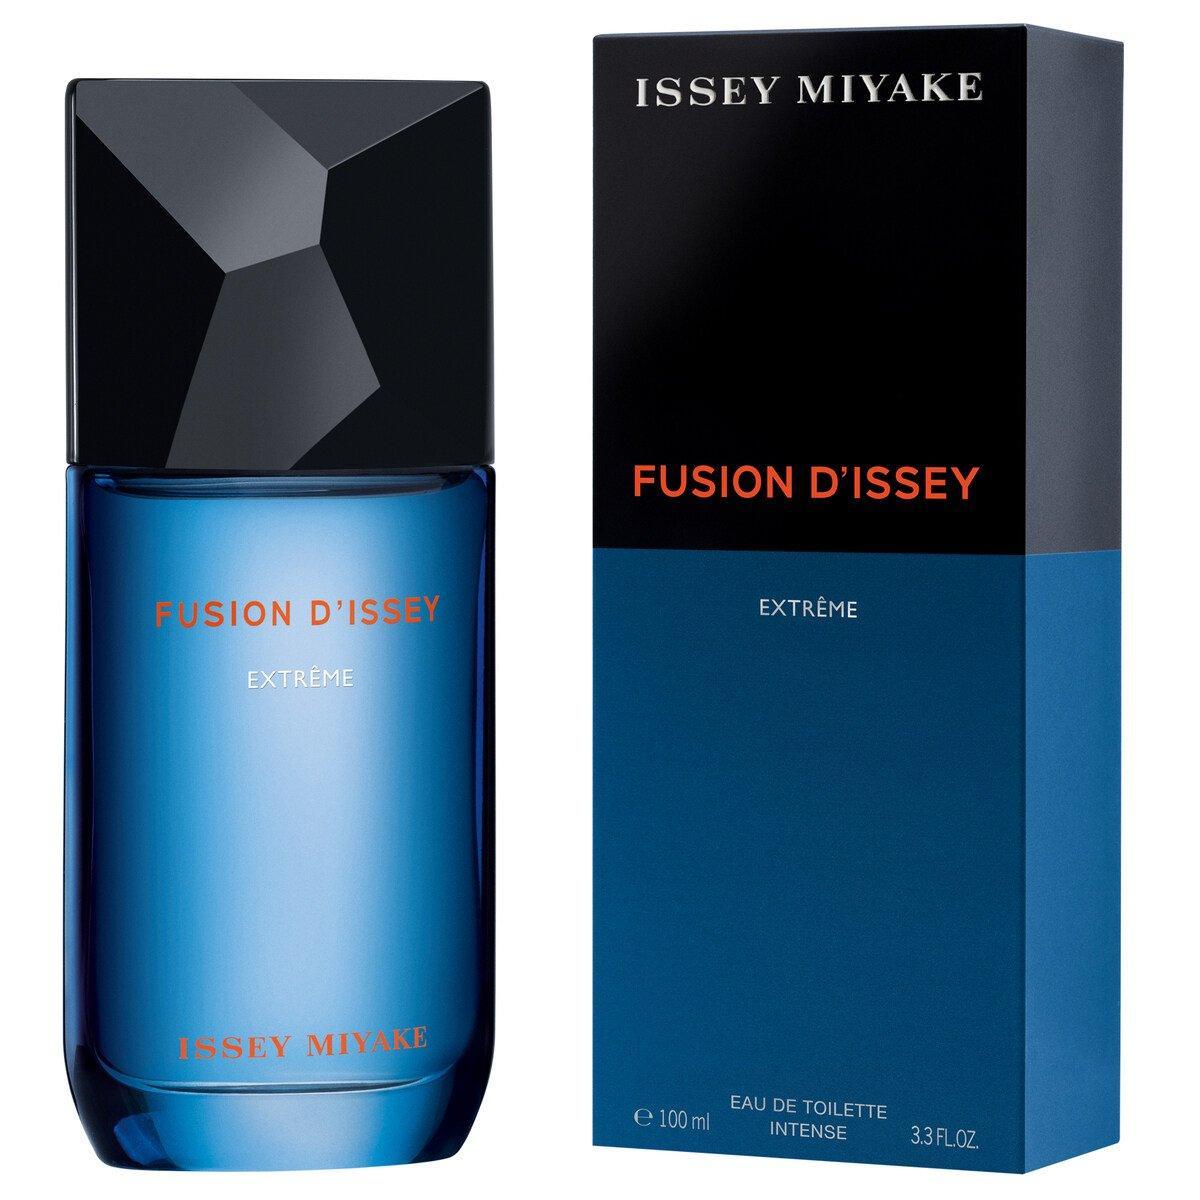 ISSEY MIYAKE FUSION D'ISSEY EXTREME - ScentsForever